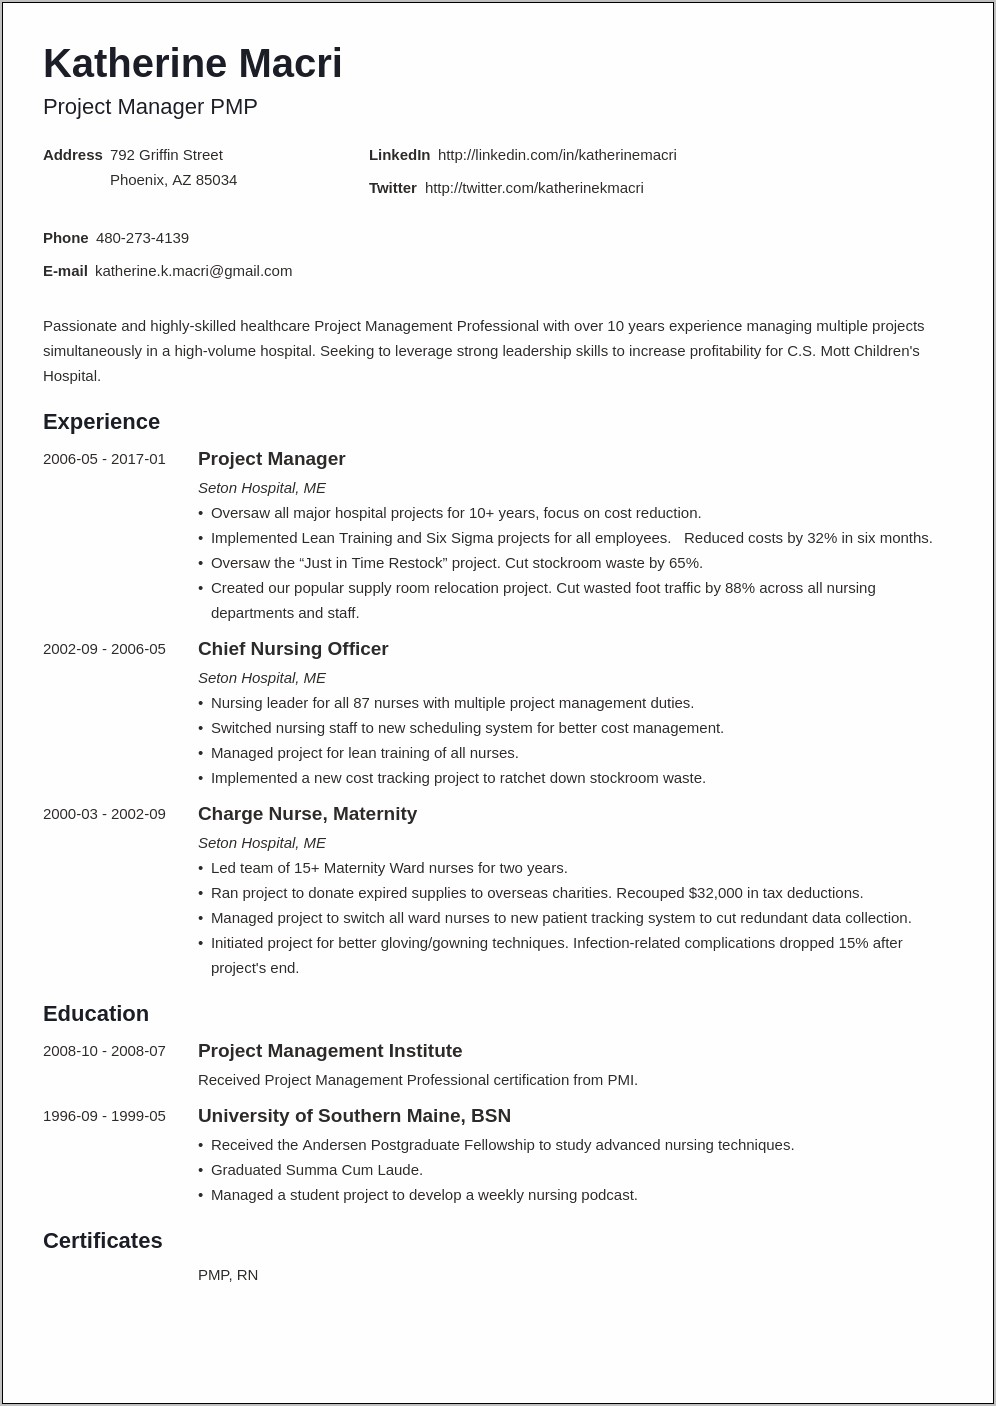 Resume For Project Manager Pdf